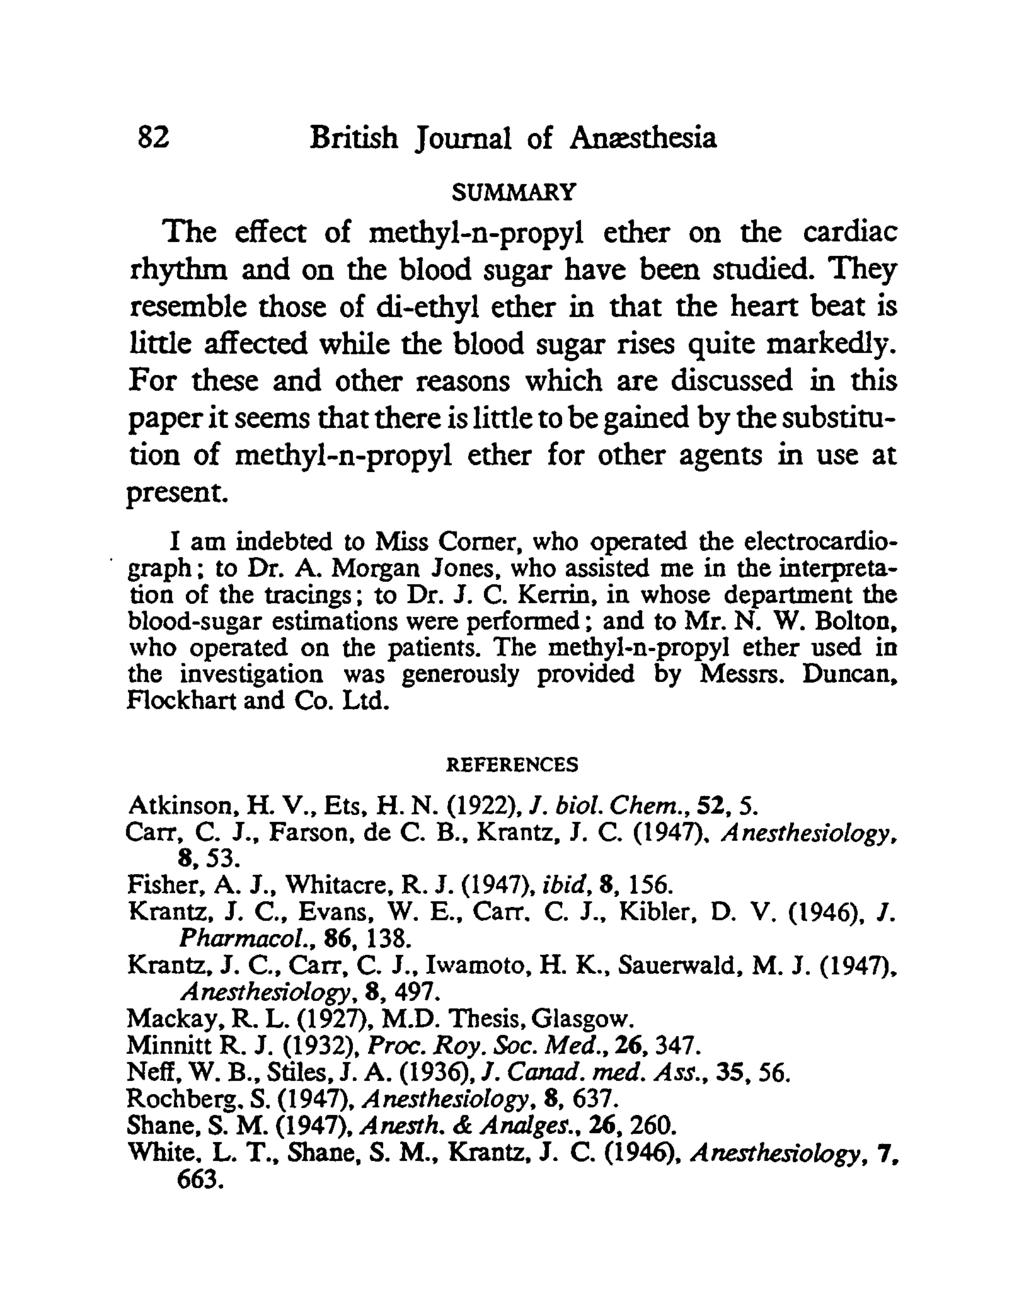 82 British Journal of Anaesthesia SUMMARY The effect of methyl-n-propyl ether on the cardiac rhythm and on the blood sugar have been studied.